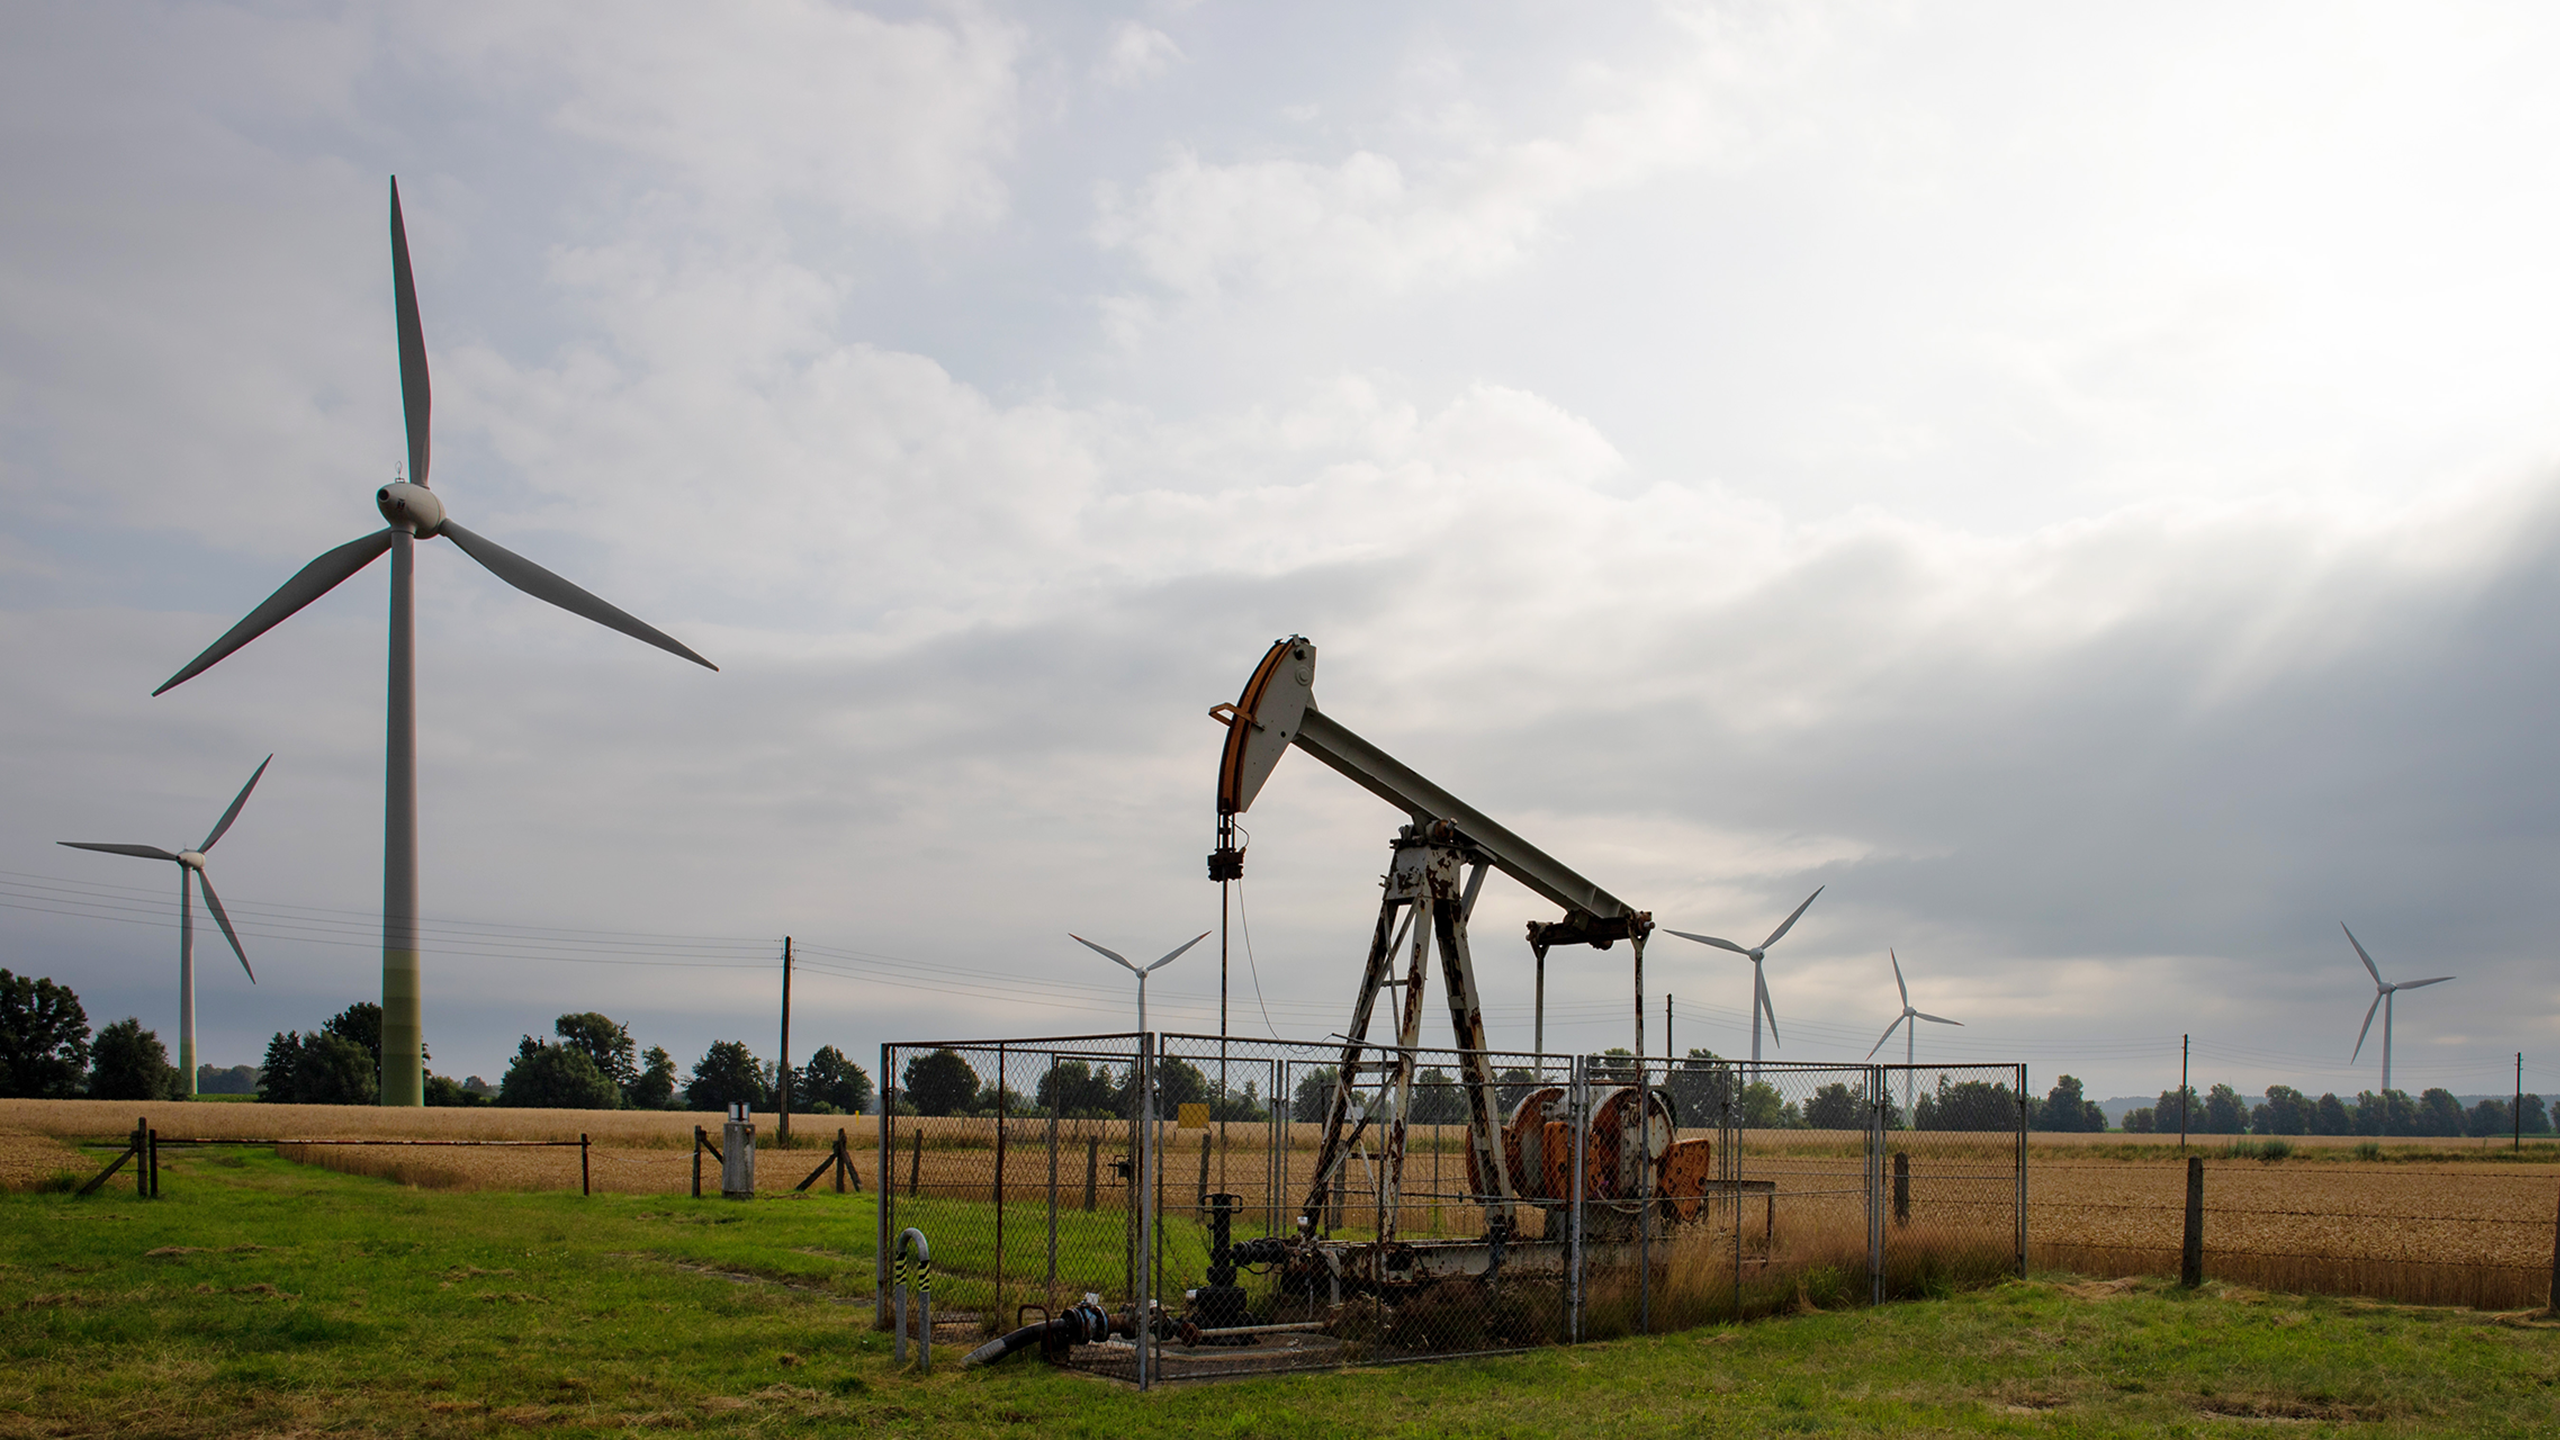 Photo shows energy windmills and an oil pumpjack near each other in a landscape